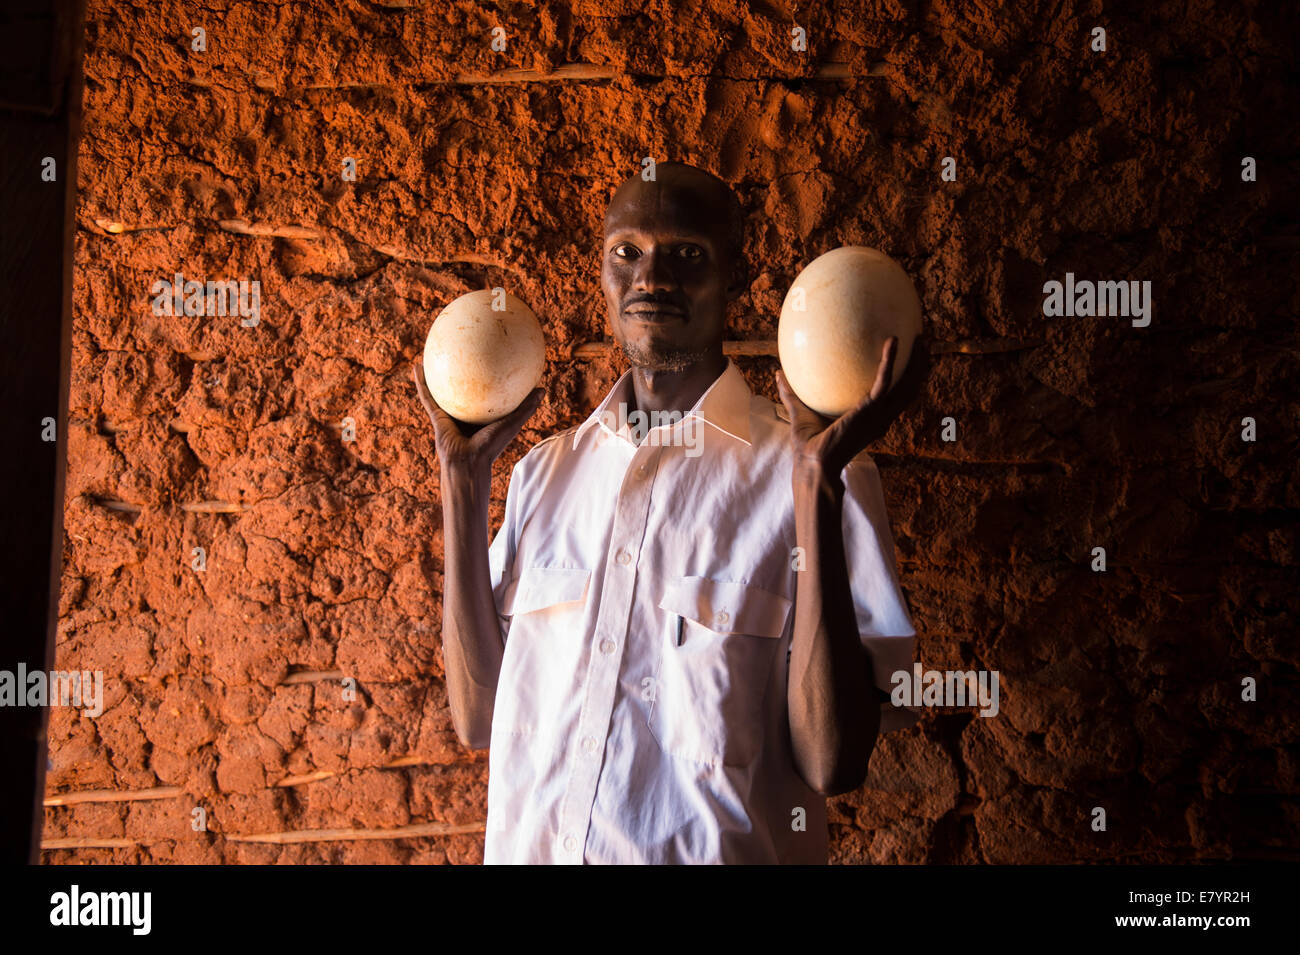 An Unidentified man holds up illegal Ostrich eggs he is trying to sell on the black market in Wamba, Kenya, September 26, 2013. Stock Photo